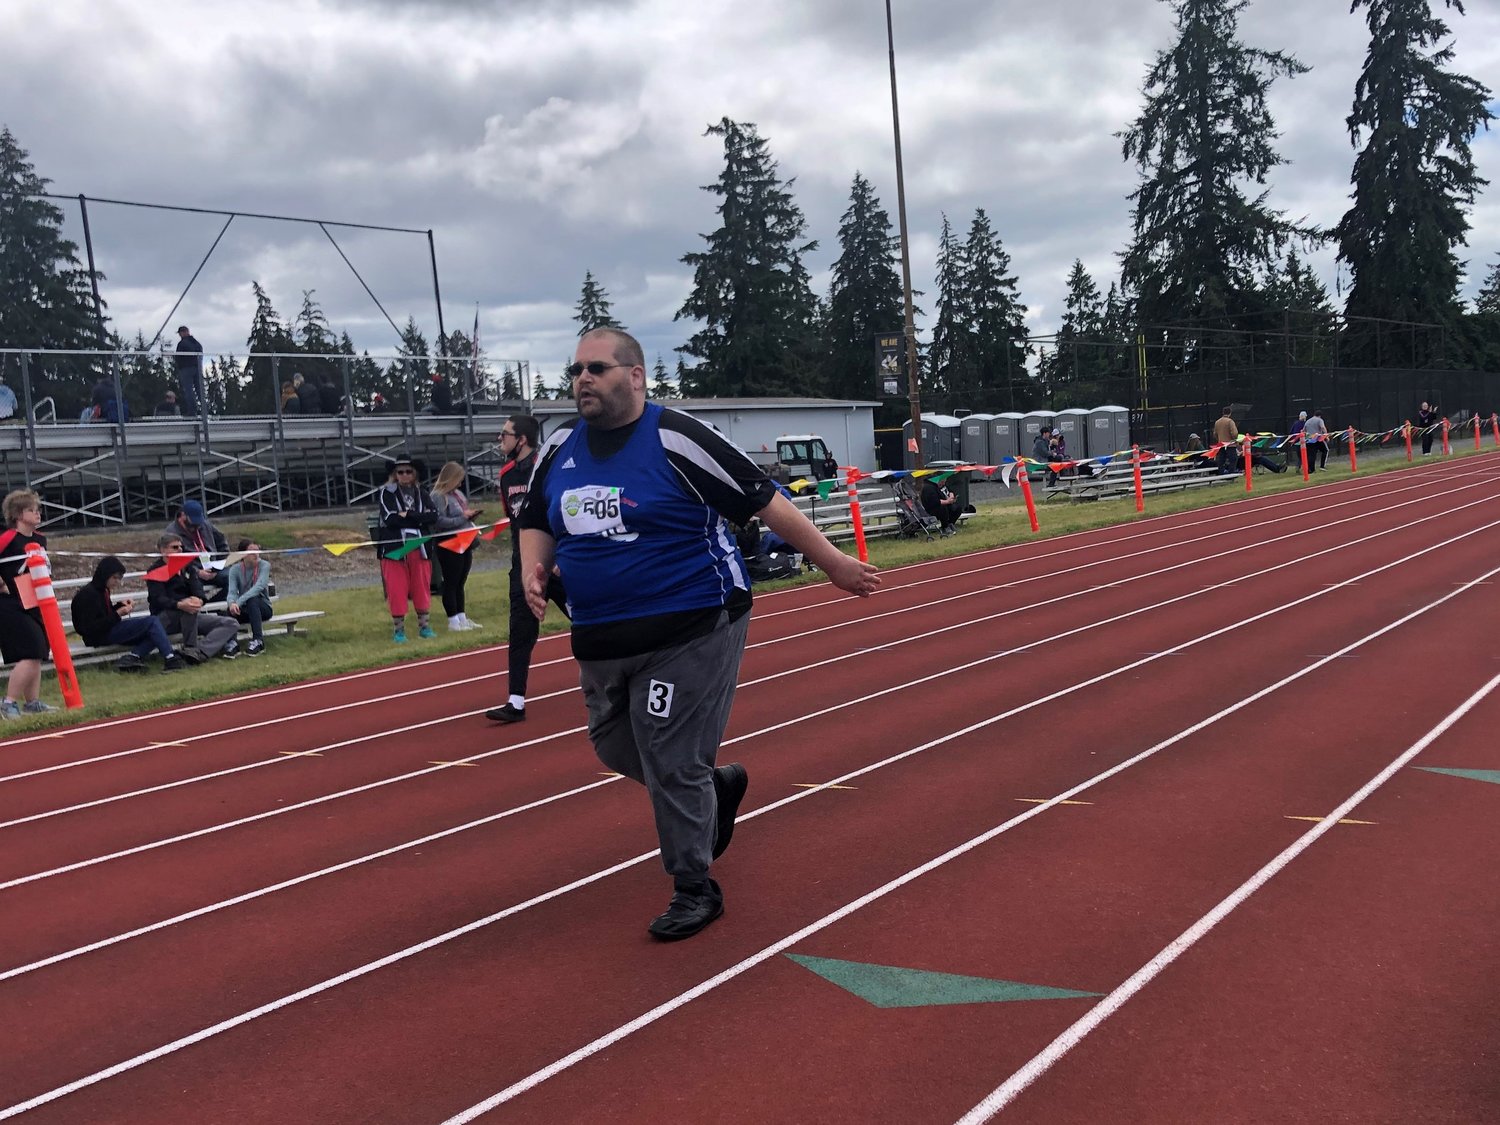 Alex Salter is shown in the final stretch of his race at the Washington State Special Olympics Track and Field Games on Sunday, June 19, 2022.